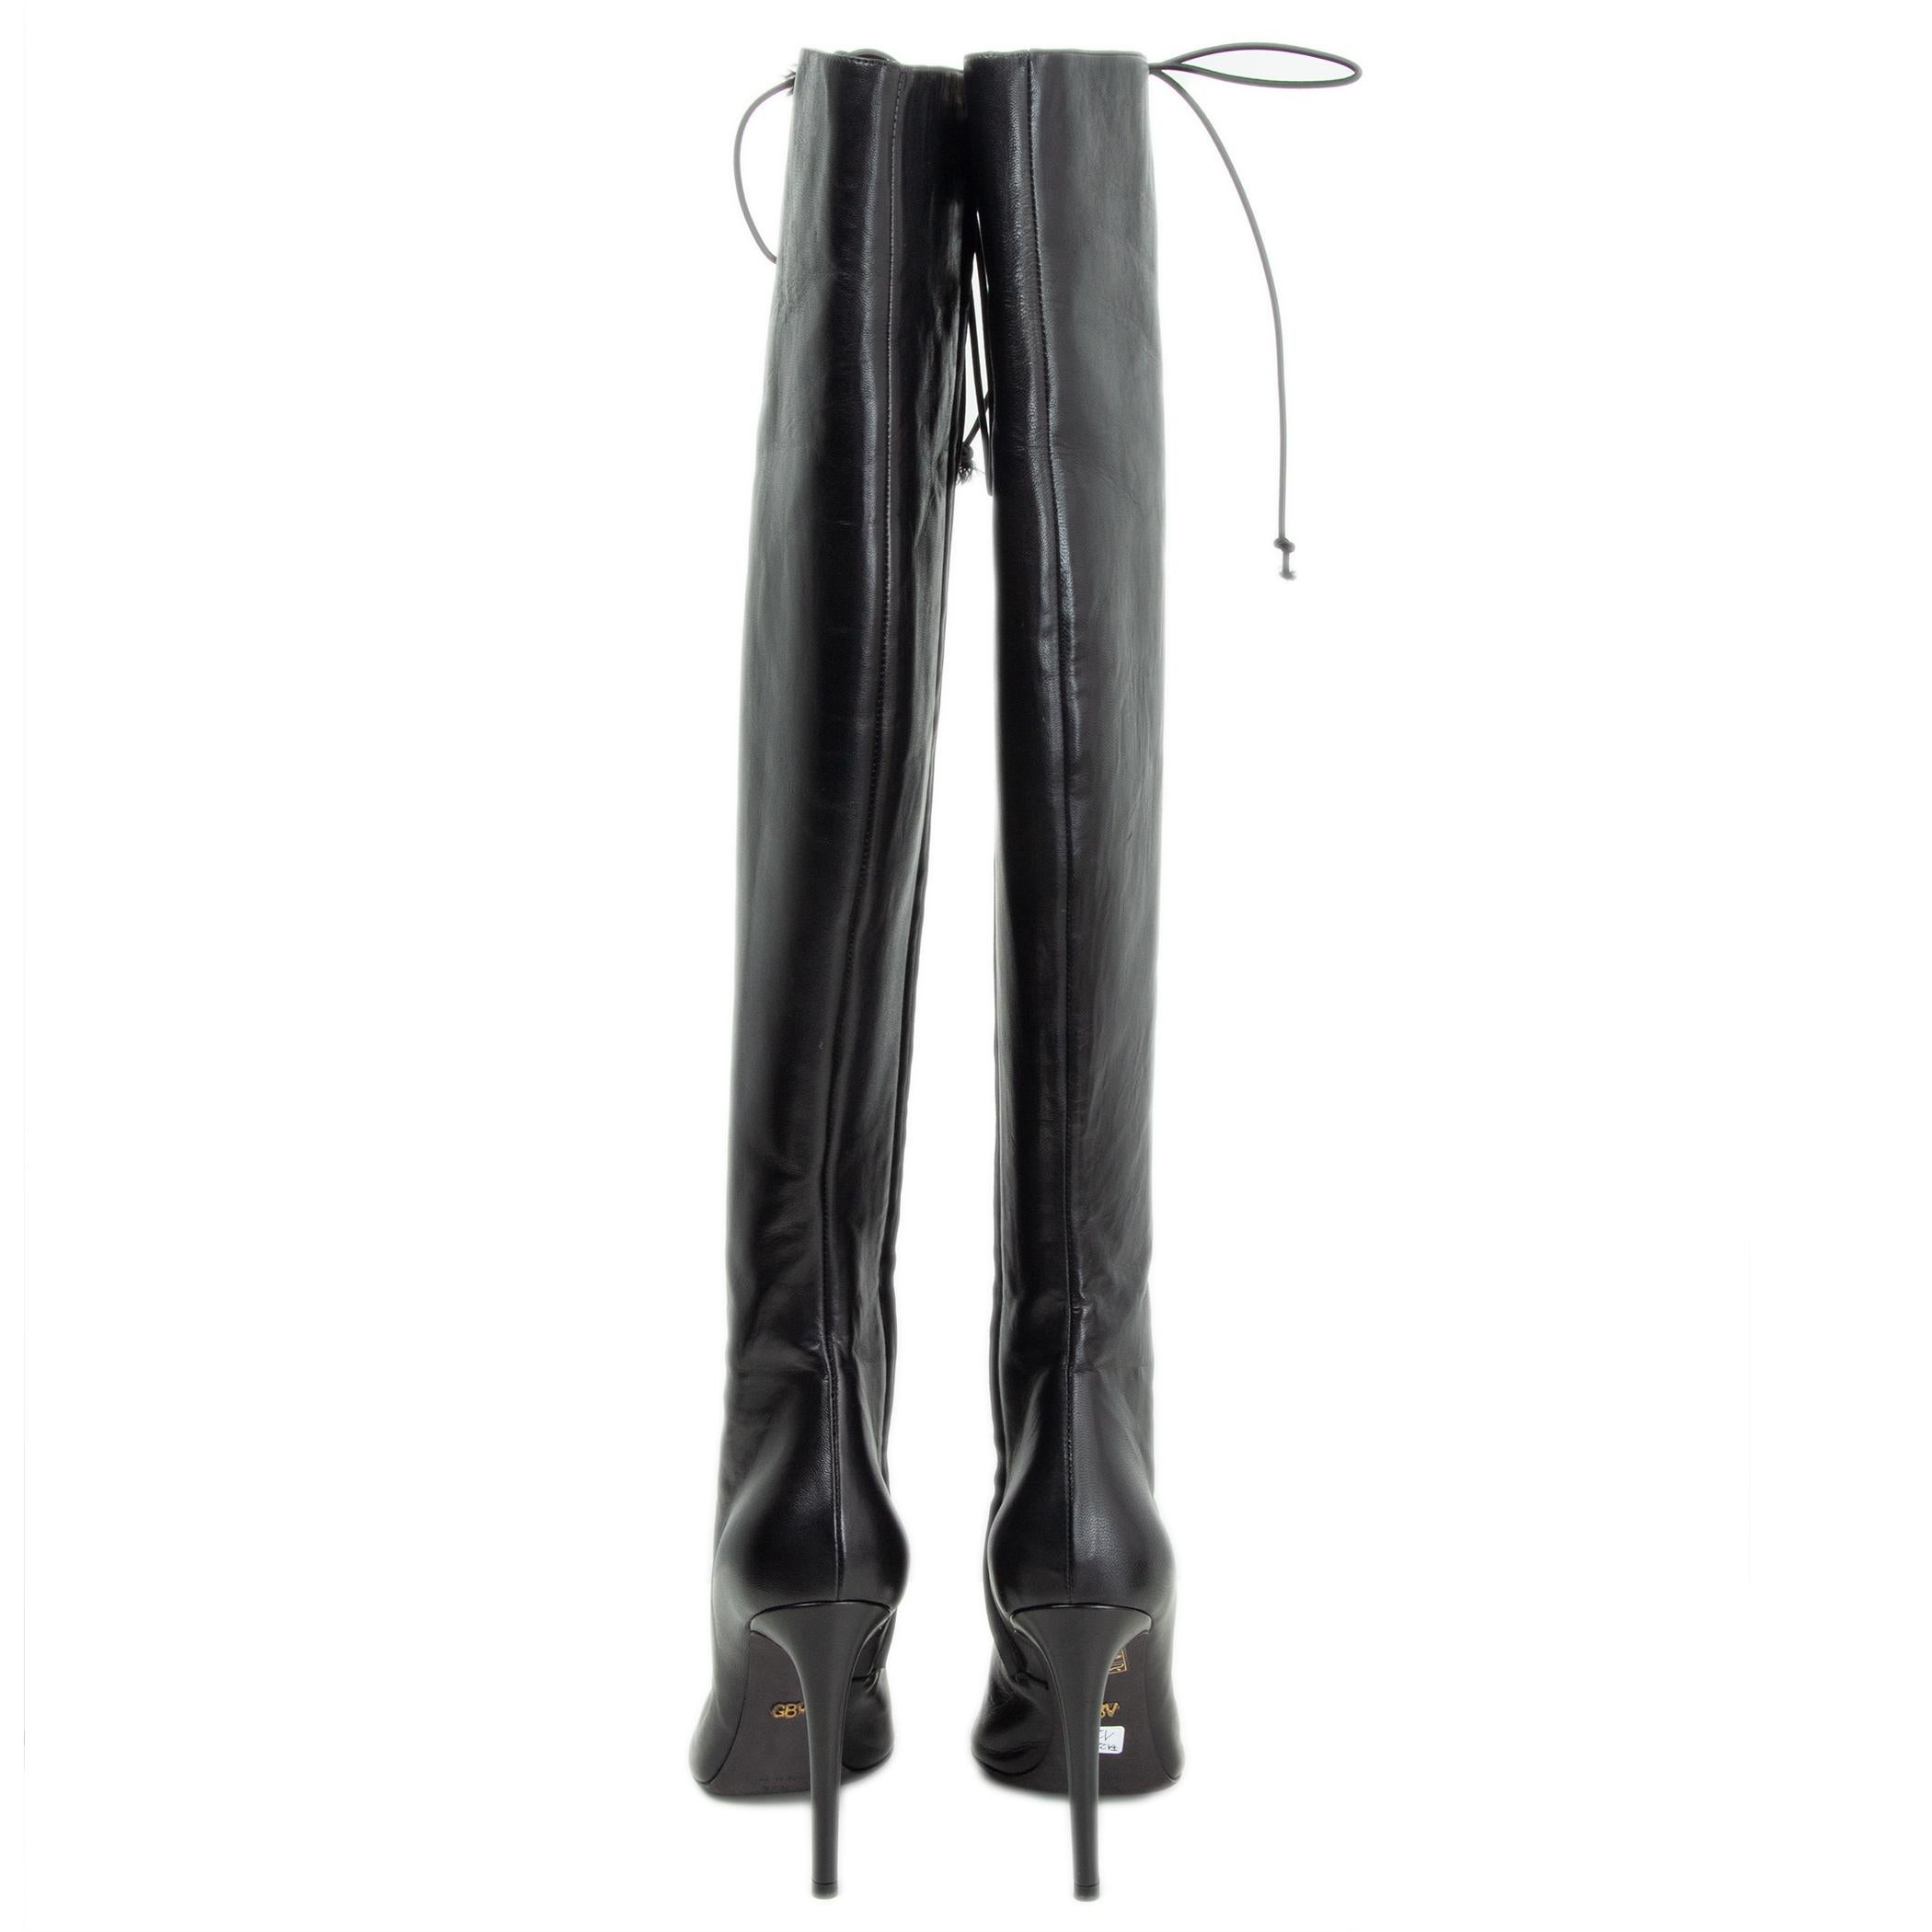 Black GIAMBATTISTA VALLI black leather VALLI LACE UP OVER KNEE Boots Shoes 37.5